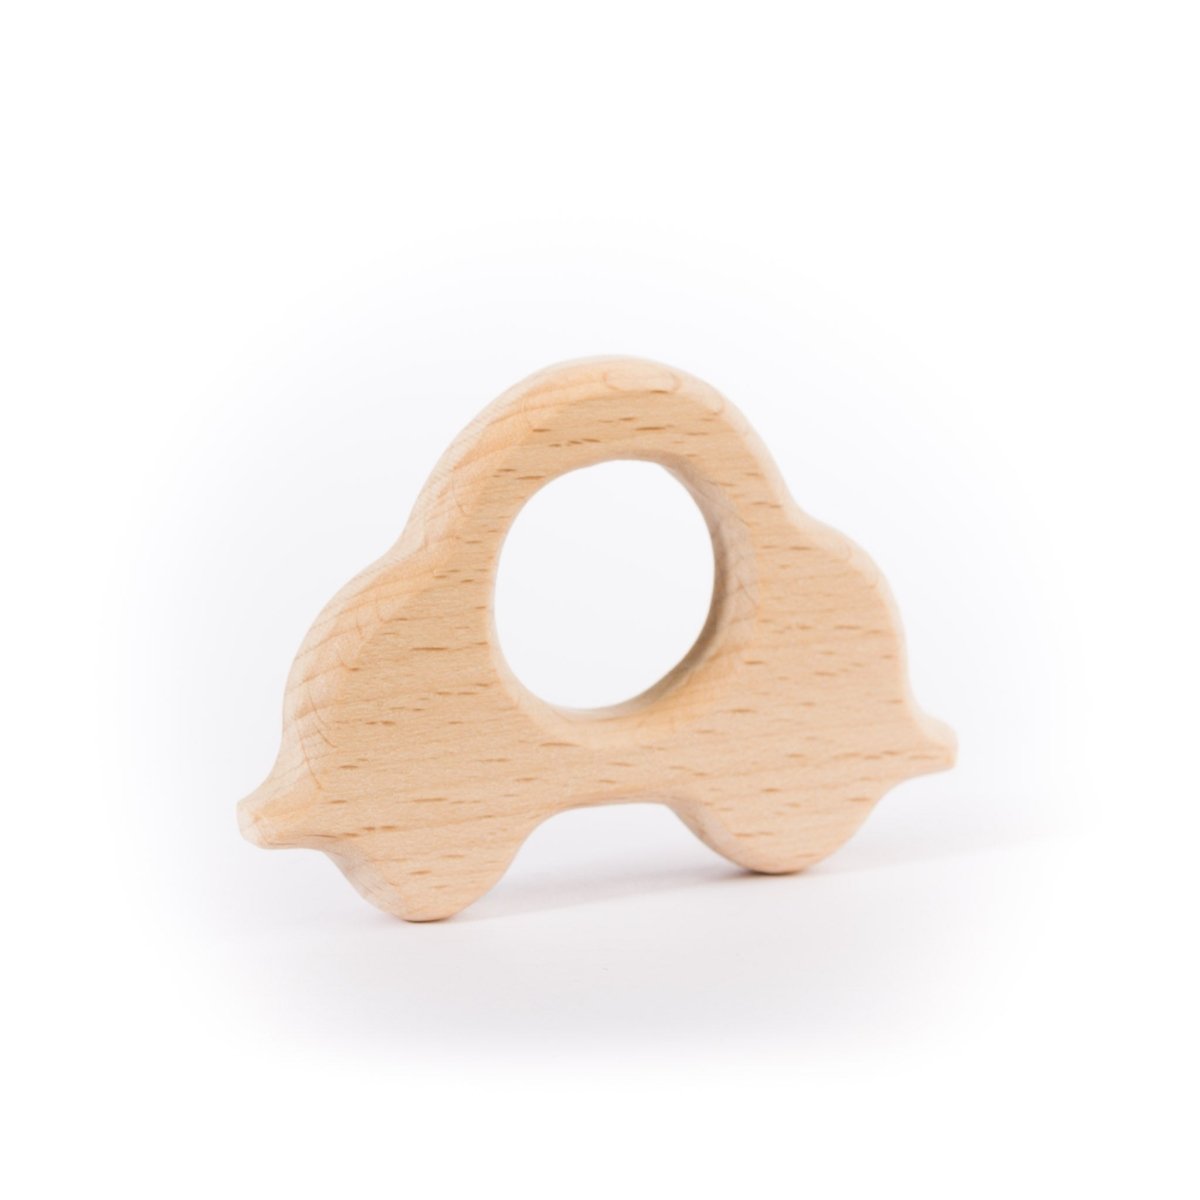 Wood Rings & Pendants Small - Beech Wood Car from Cara & Co Craft Supply